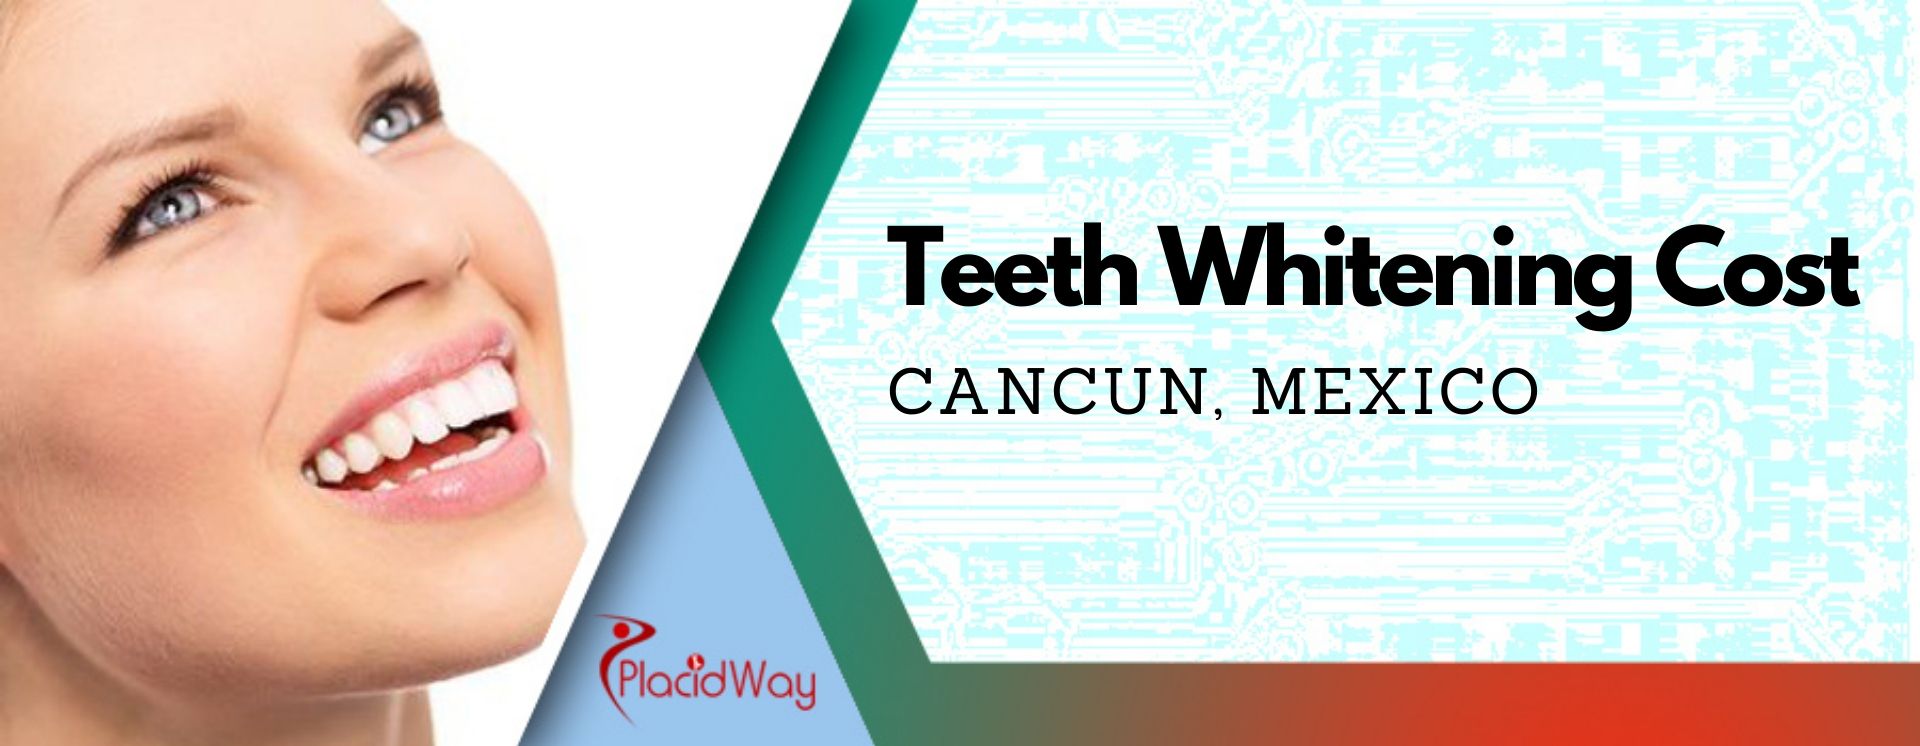 Teeth Whitening Cost in Cancun, Mexico